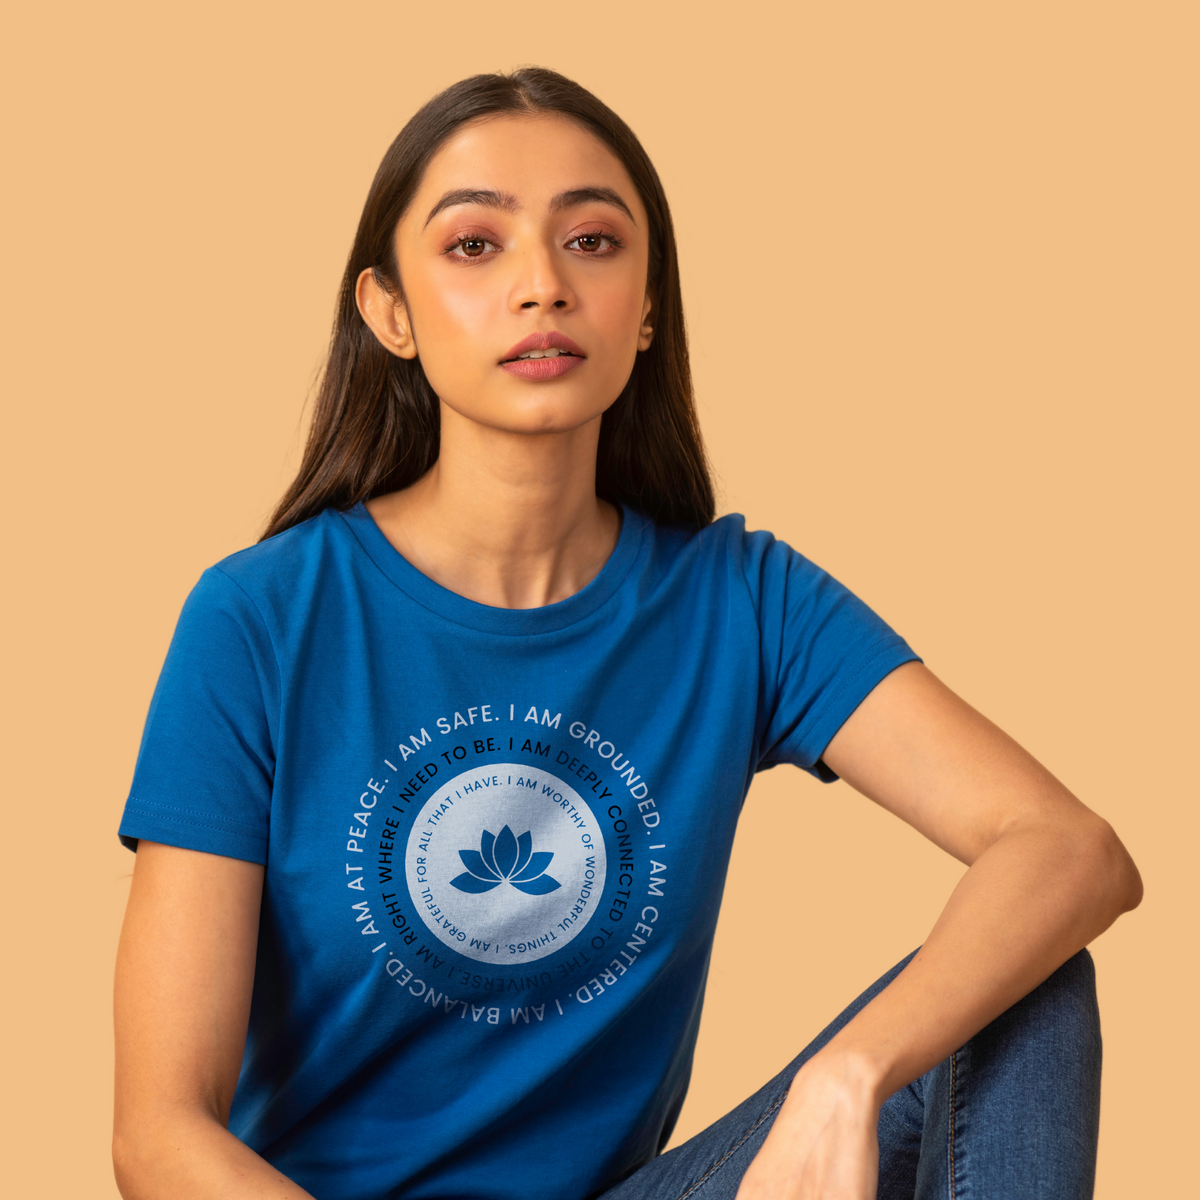 Inspirational Yoga t shirts for Men and Women